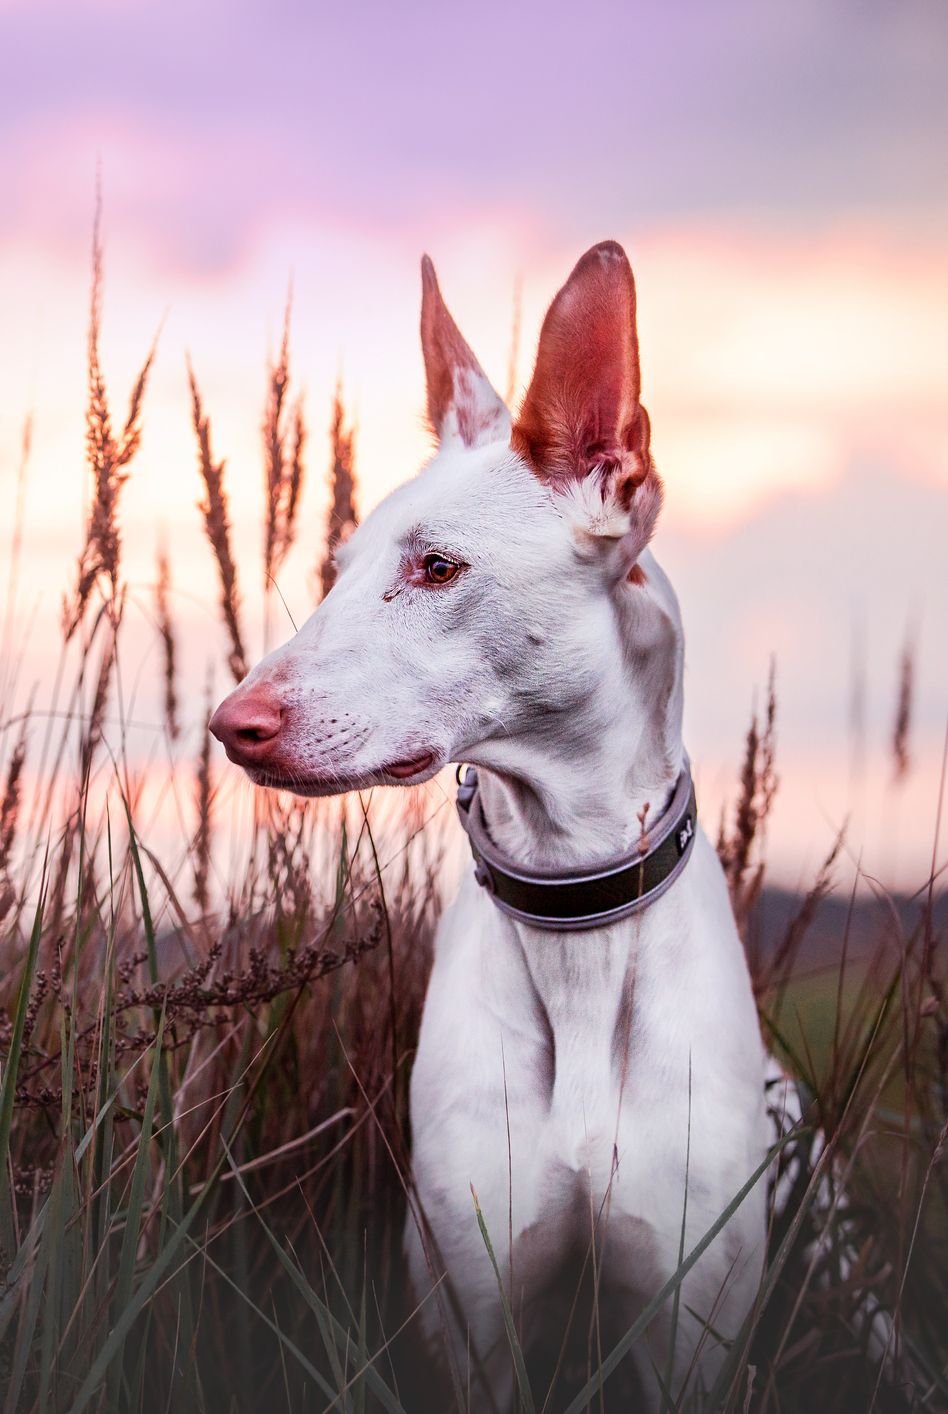 12 Dog Breeds With Long Noses: Dachshund, Greyhounds, And More